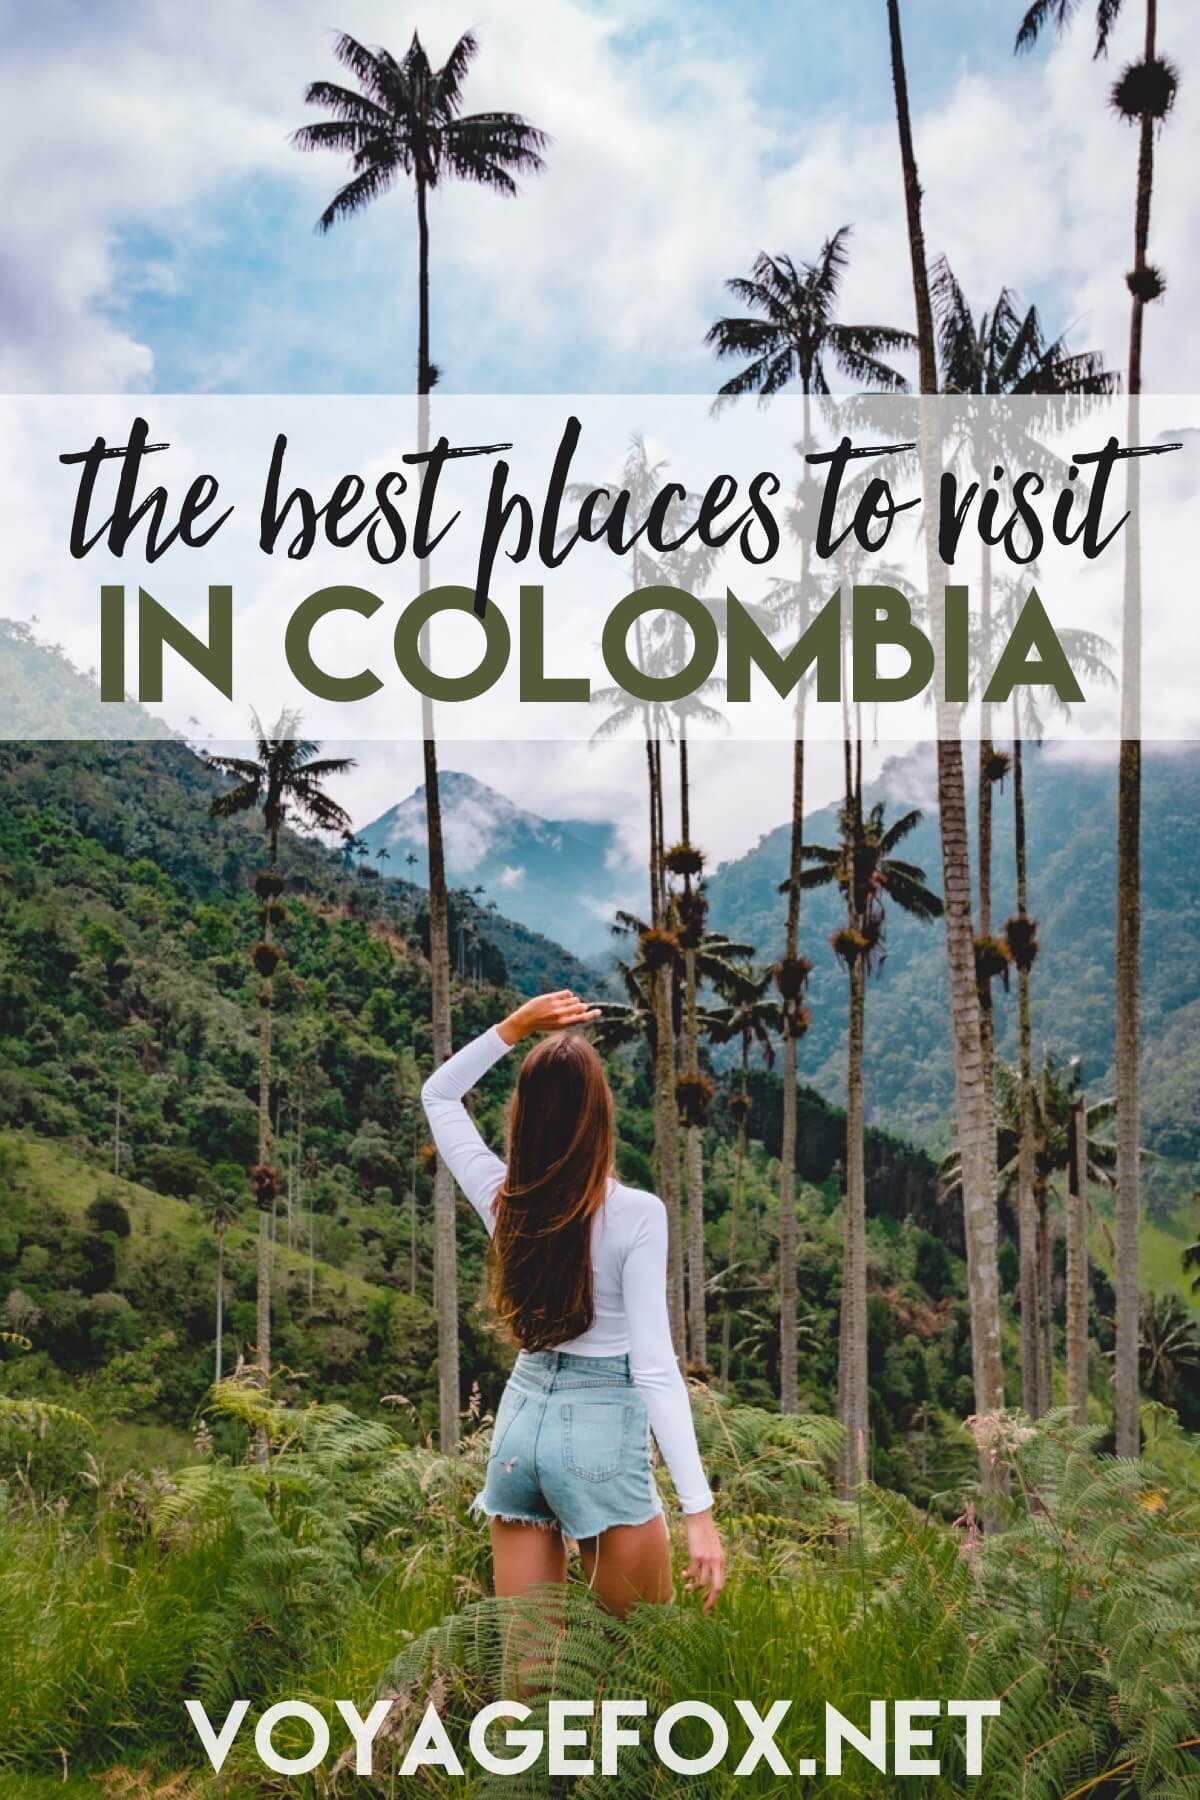 The best places to visit in Colombia - my travel tips - voyagefox